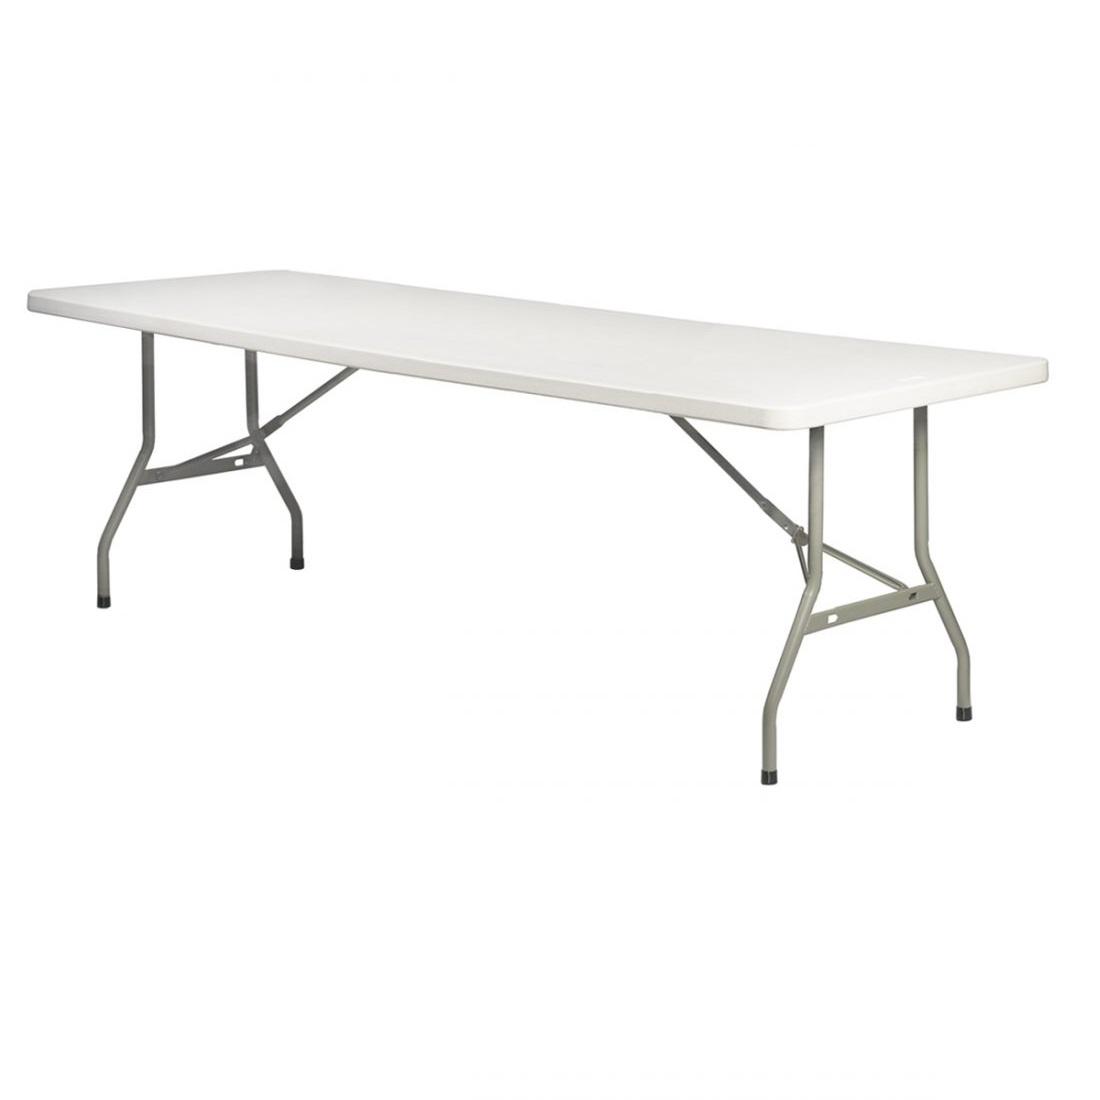 8' Rectangle Table, Table and Tent Rentals